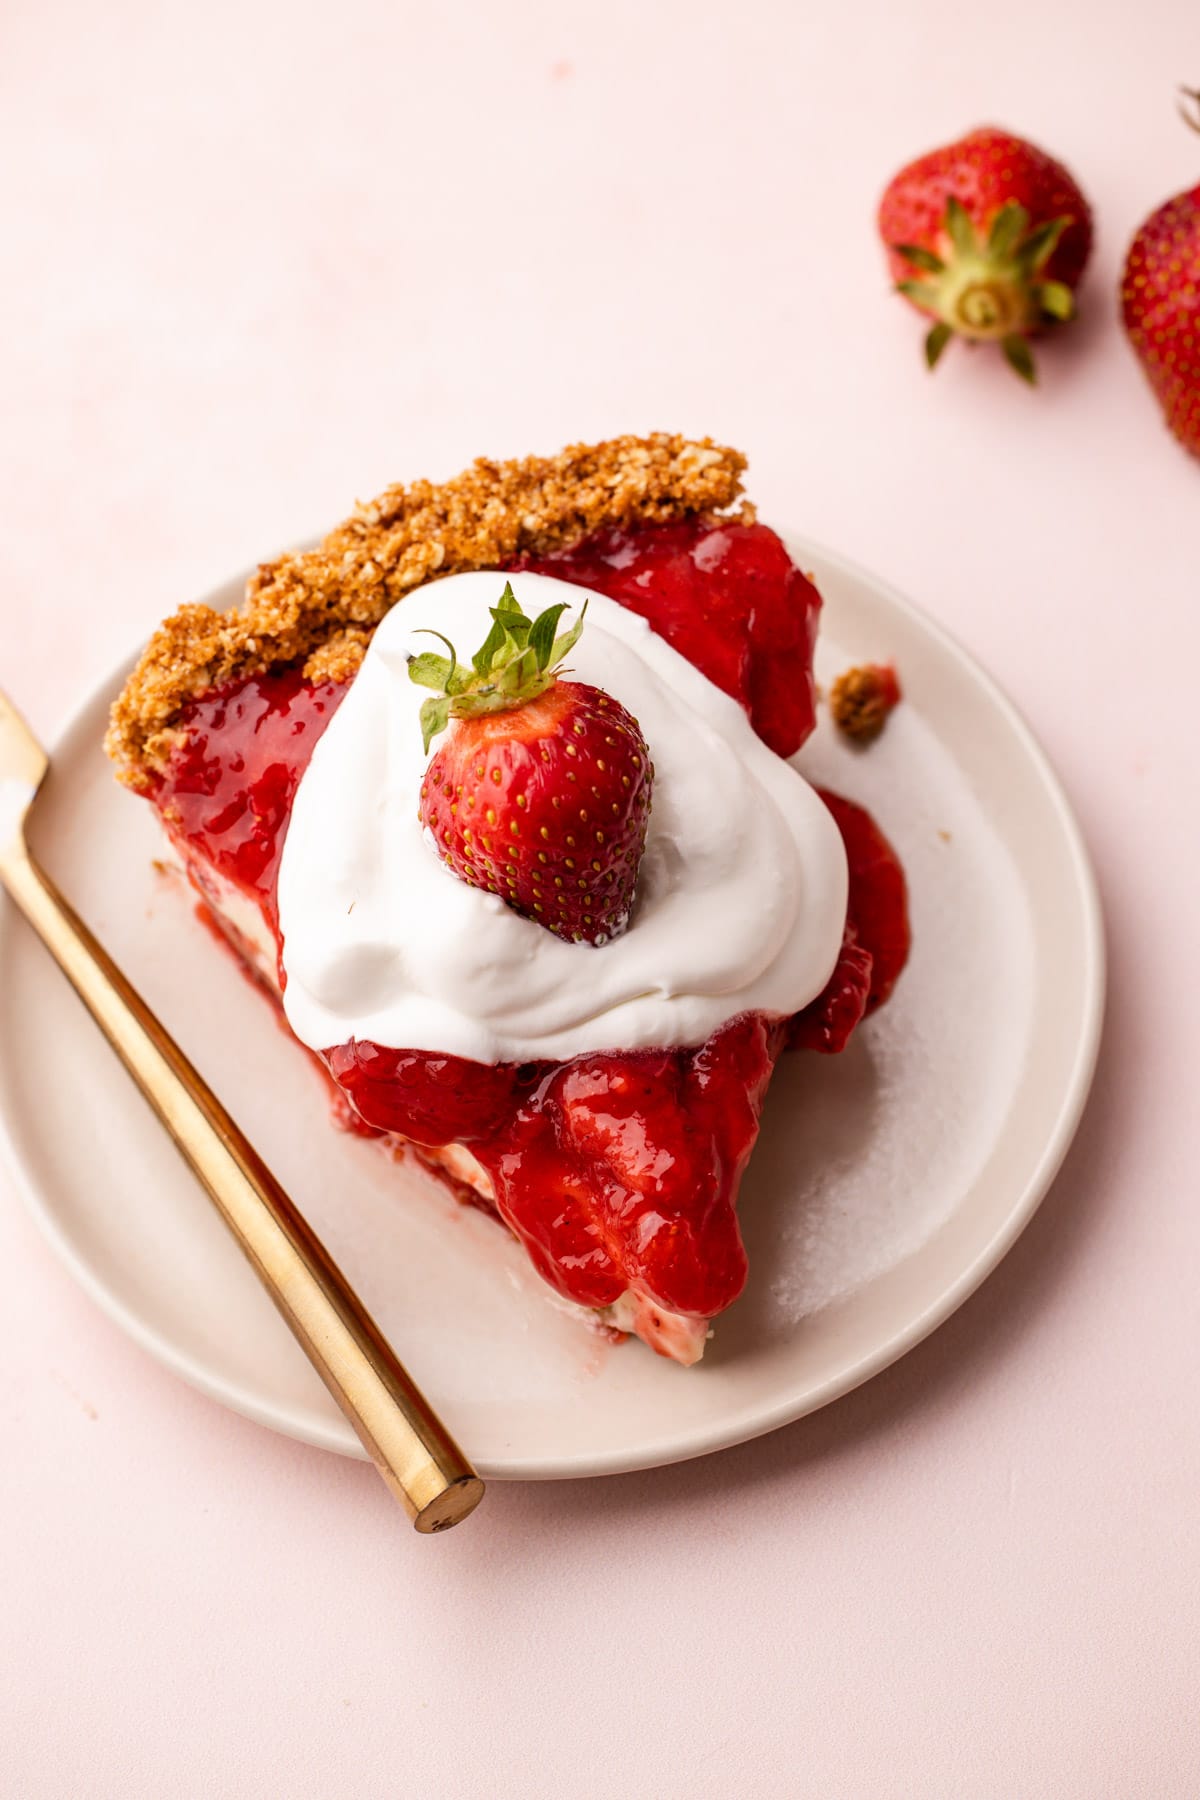 A slice of strawberry cream cheese pie on a plate.